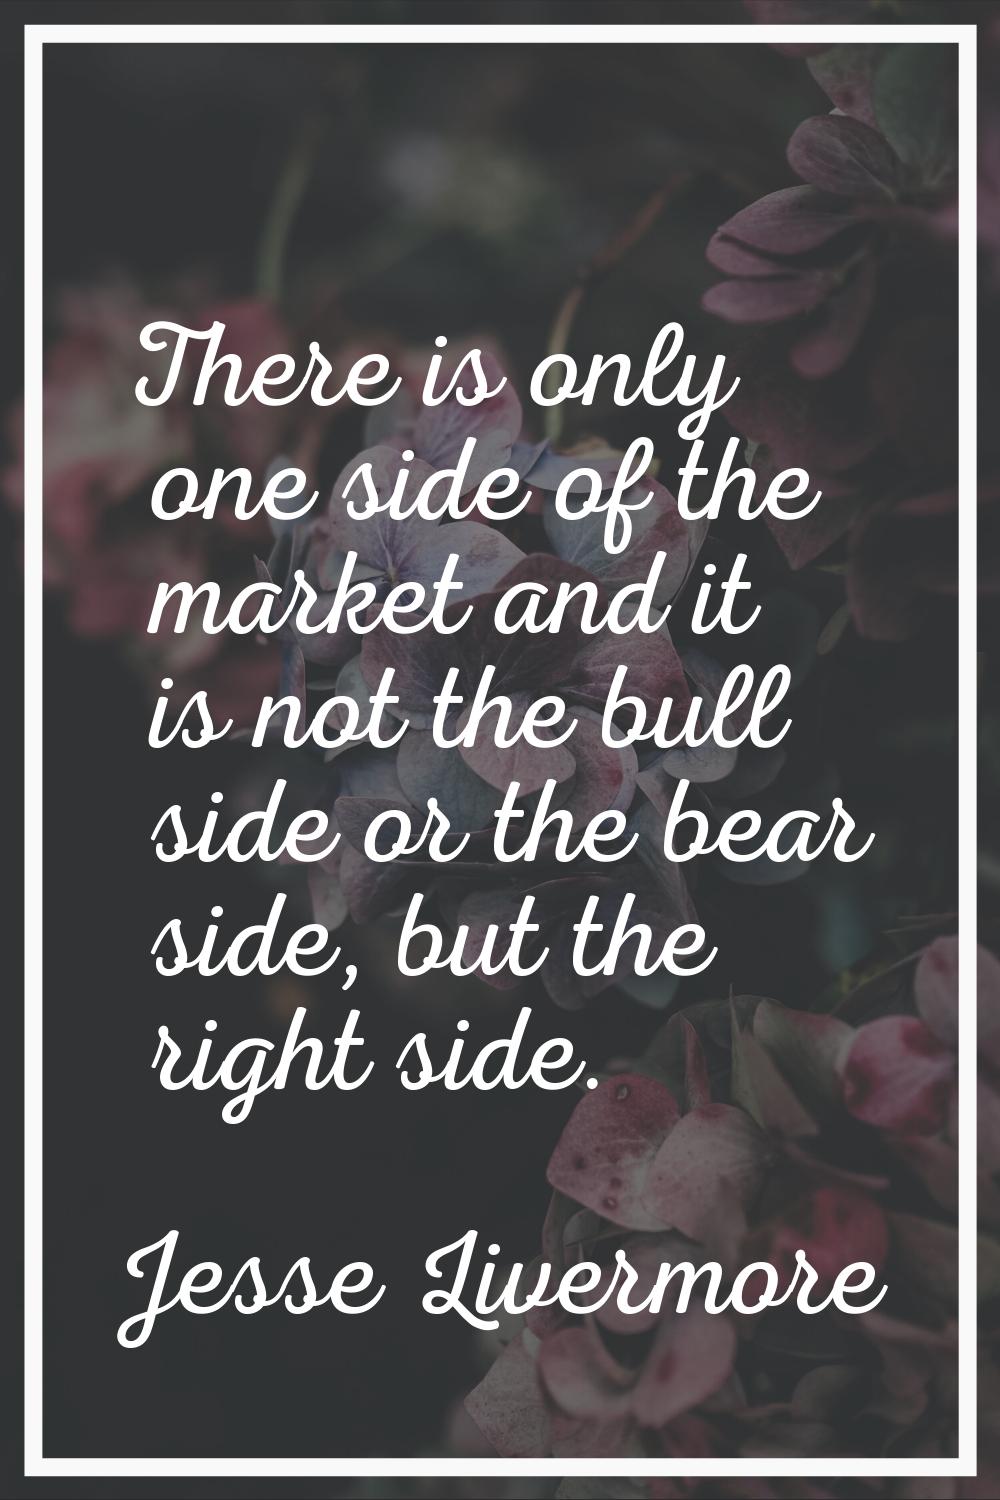 There is only one side of the market and it is not the bull side or the bear side, but the right si